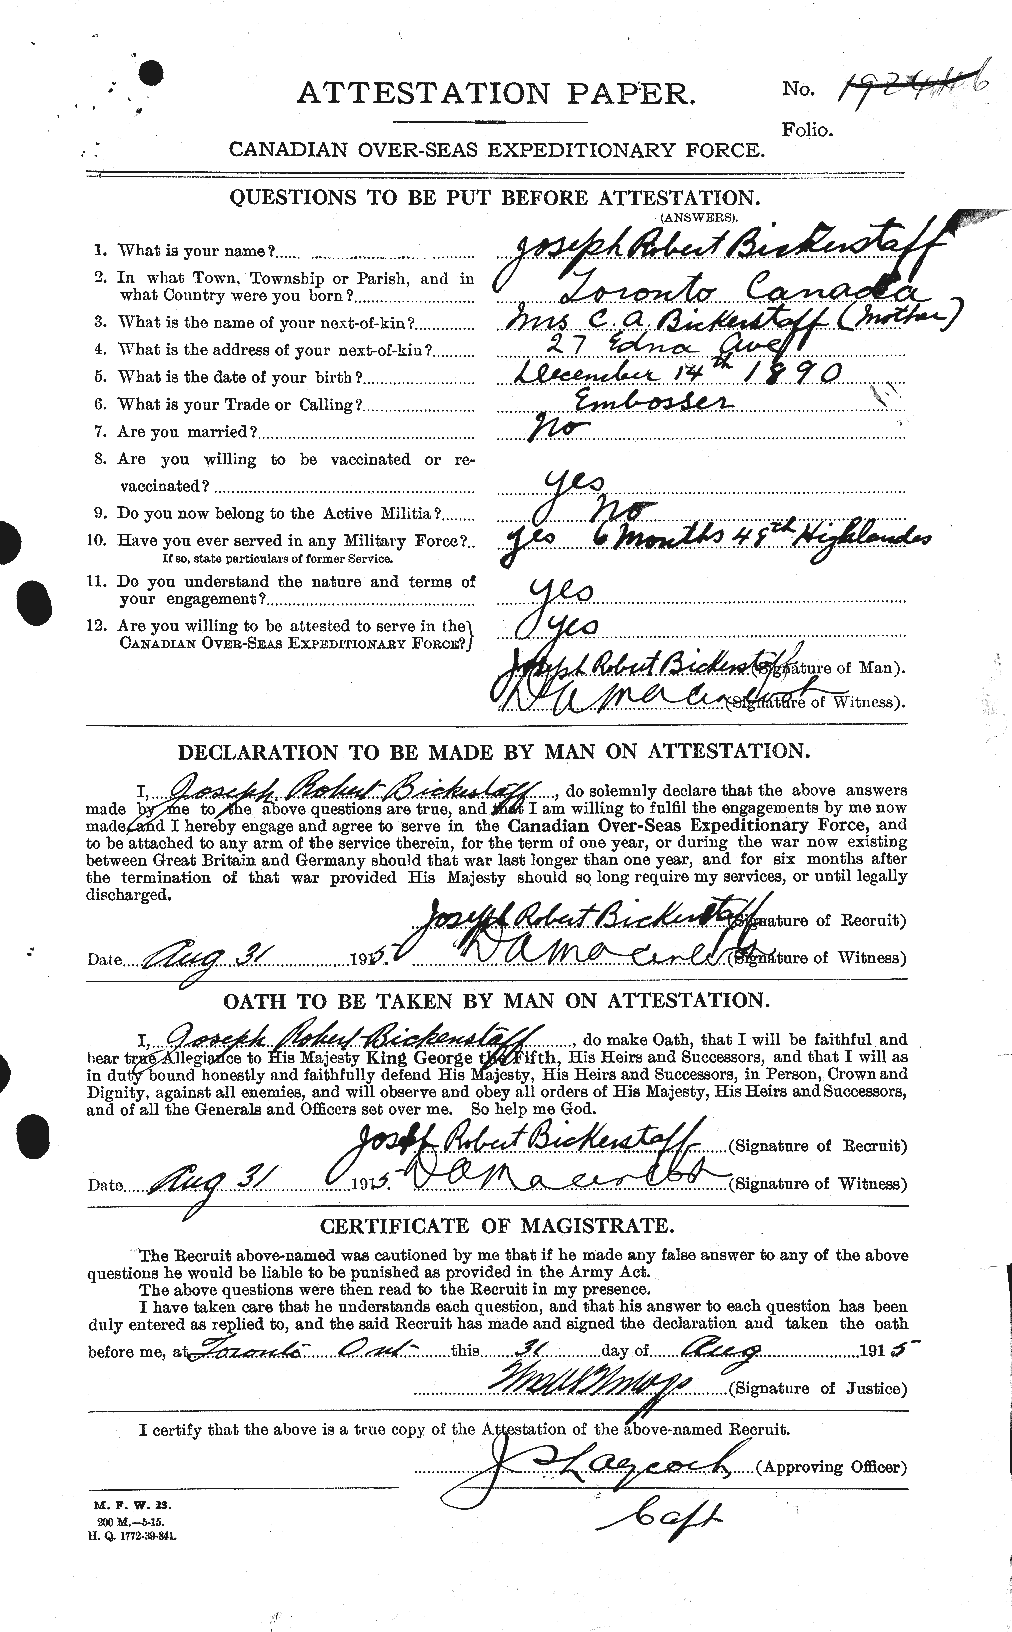 Personnel Records of the First World War - CEF 244949a